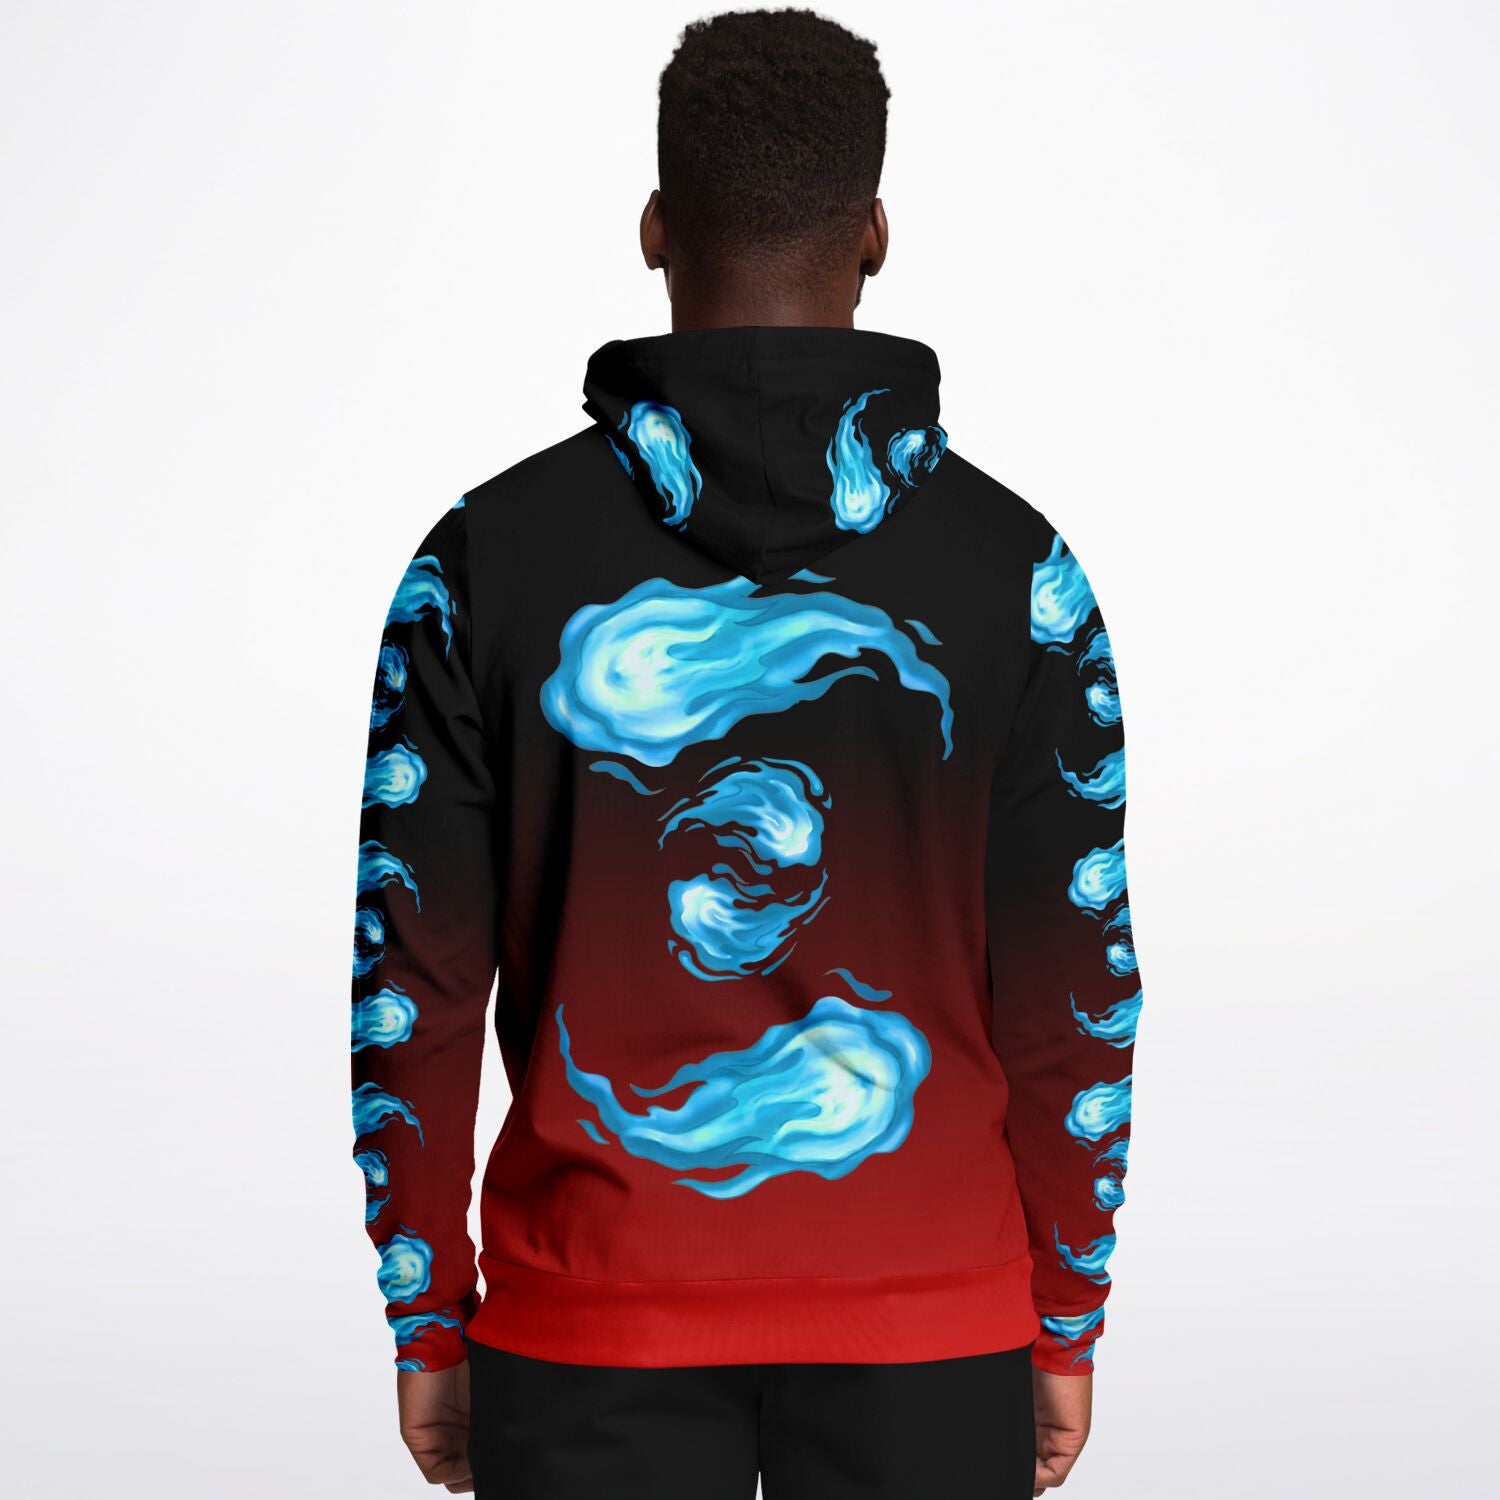 AMCThorn Art Flamesplosion Hoodie with Red Gradient Subliminator